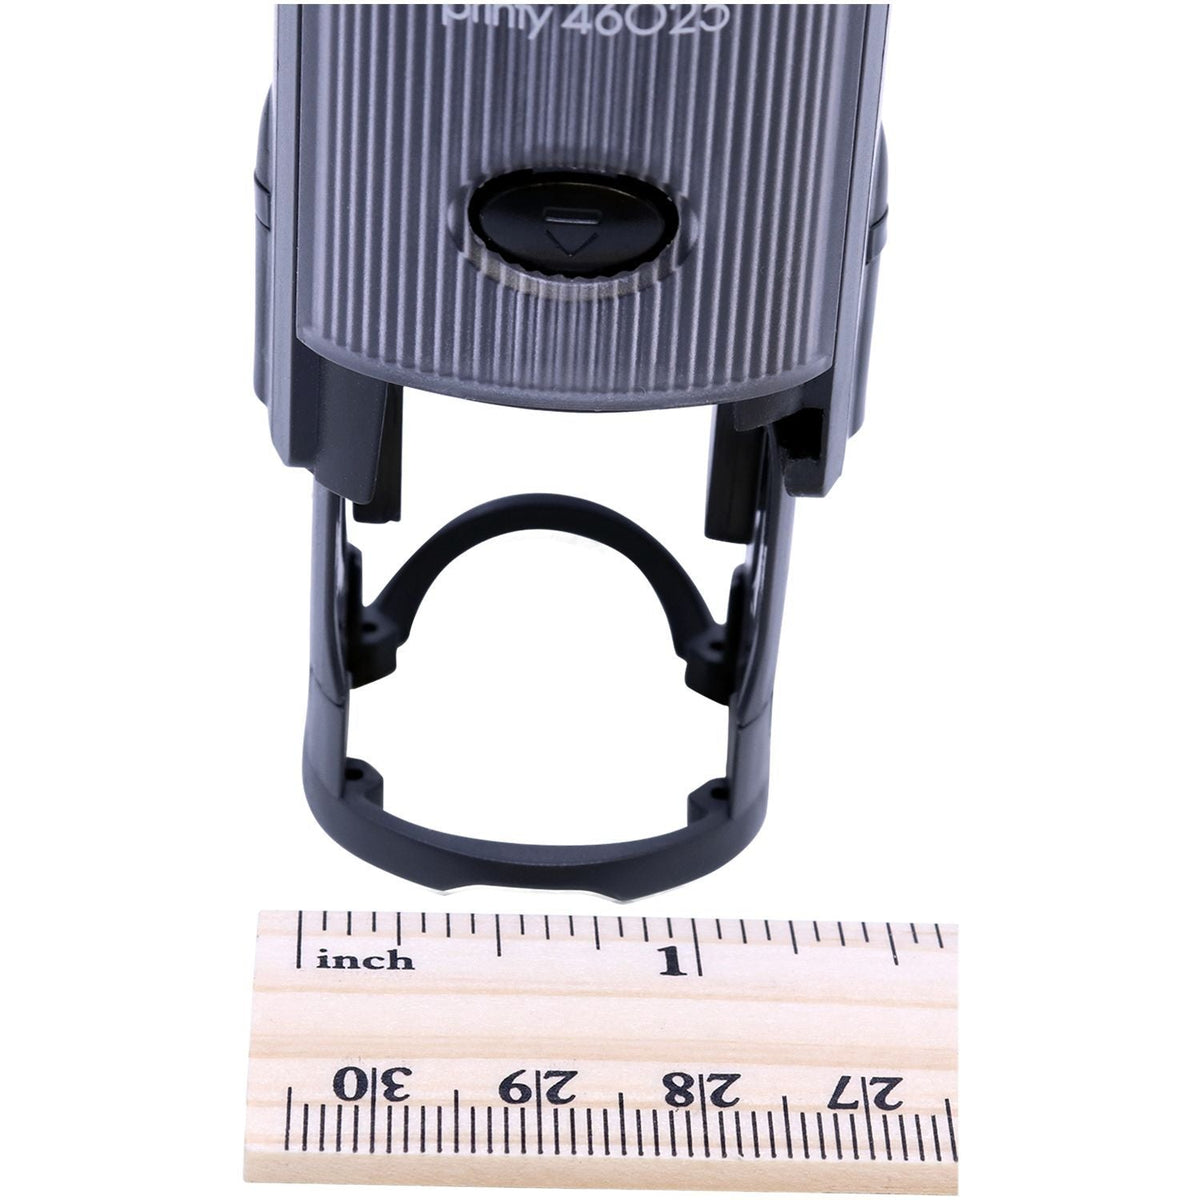 Measurment of Self-Inking Round FYI Stamp with Ruler